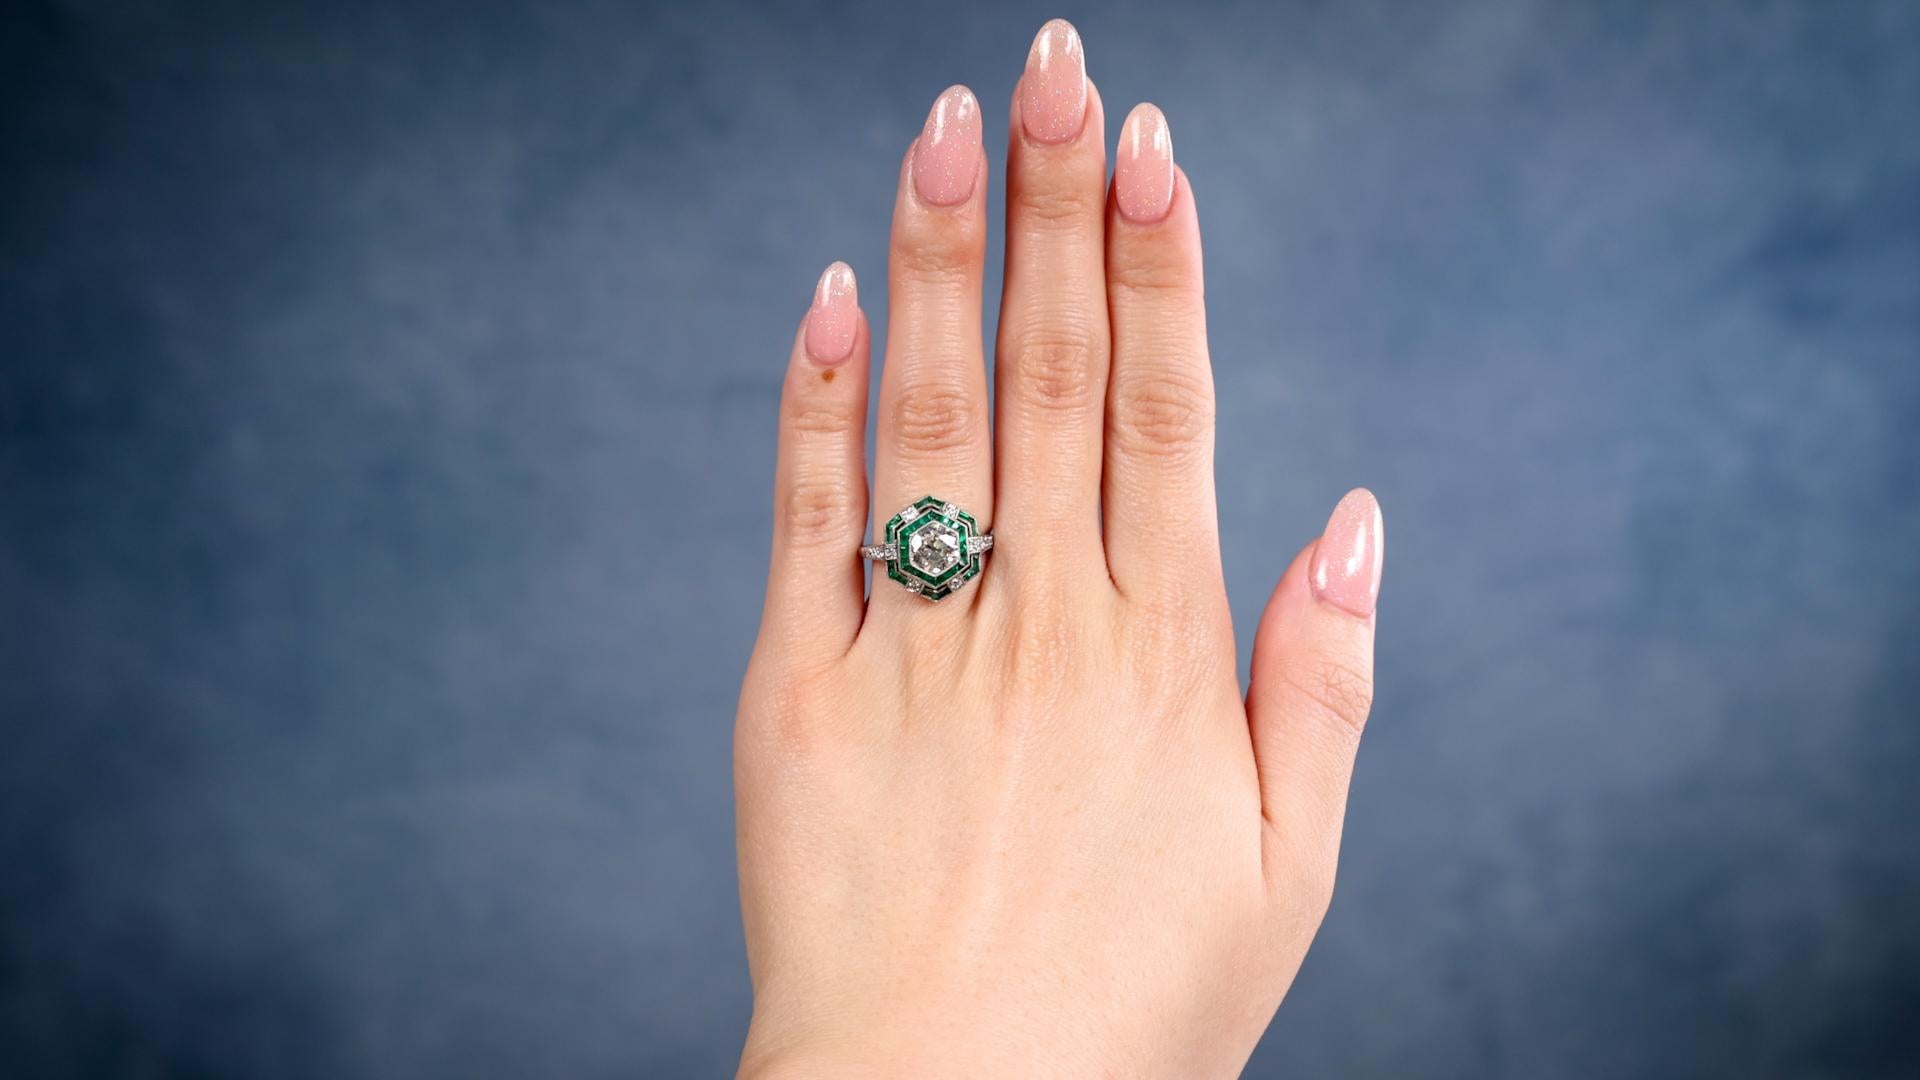 One Art Deco Inspired 1.00 Carat Old European Cut Diamond Emerald Platinum Ring. Featuring one old European cut diamond of 1.00 carat, graded K color, SI2 clarity. Accented by 30 calibré cut emeralds with a total weight of approximately 0.80 carat,